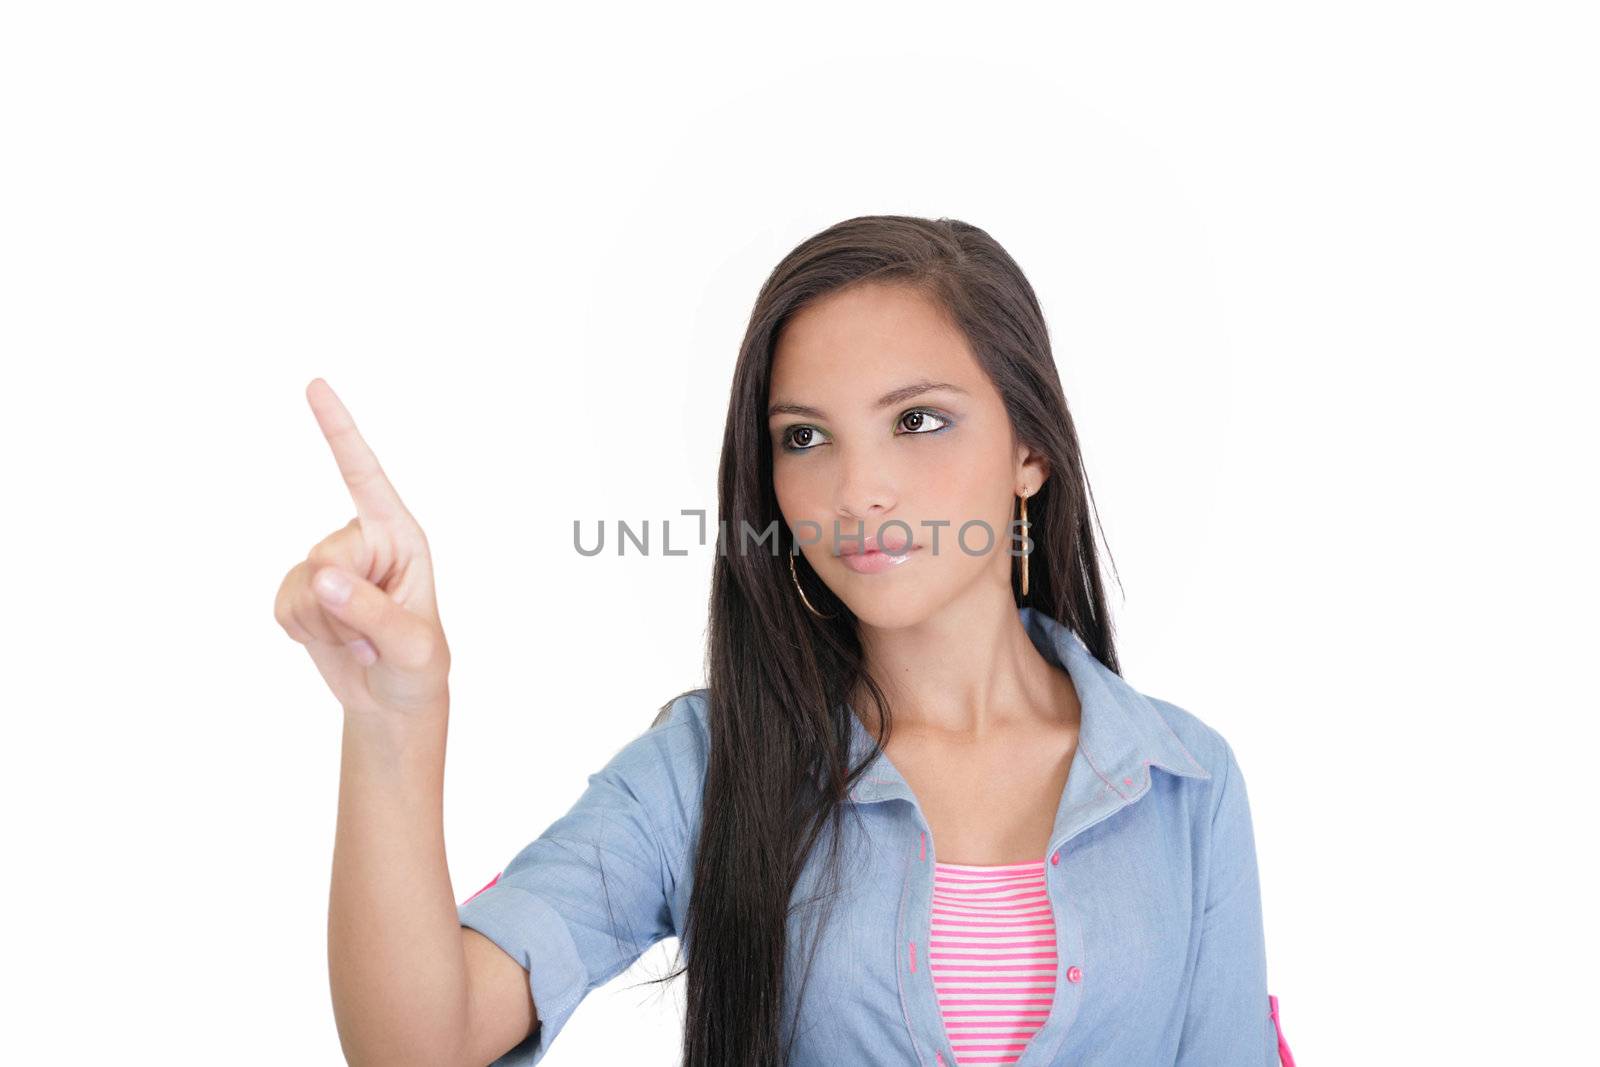 Portrait of young business woman pointing at white background by dacasdo